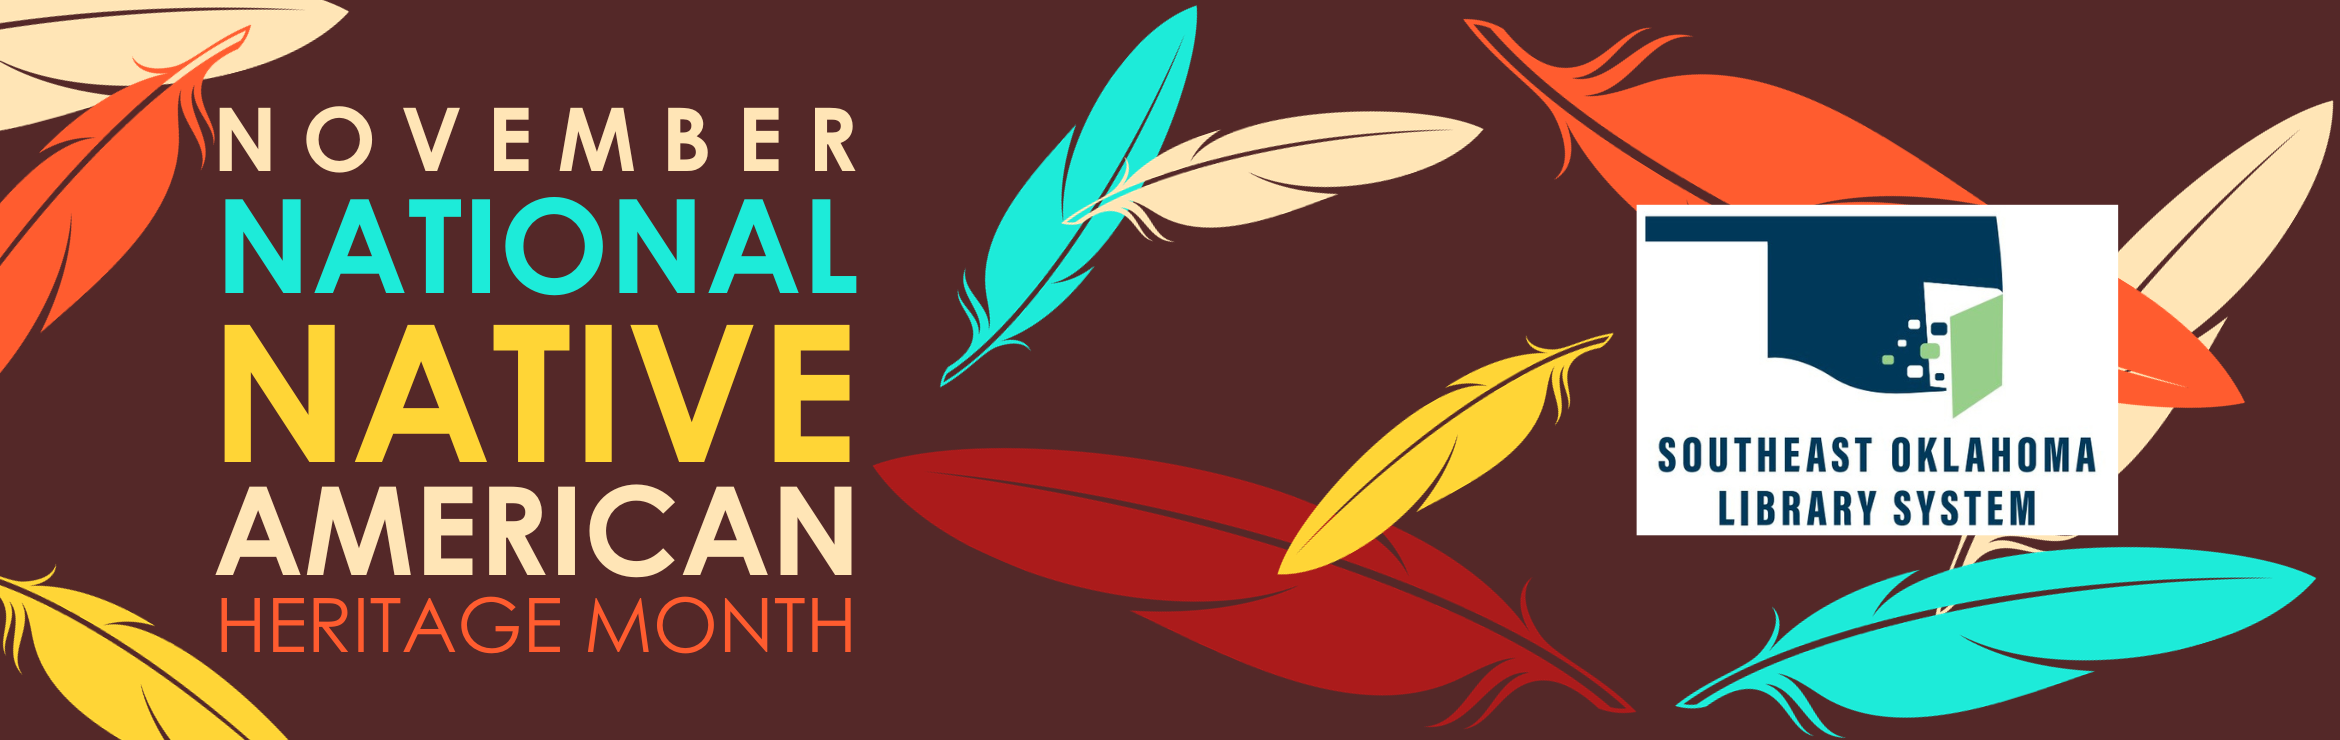 National Native American Heritage Month Infographic